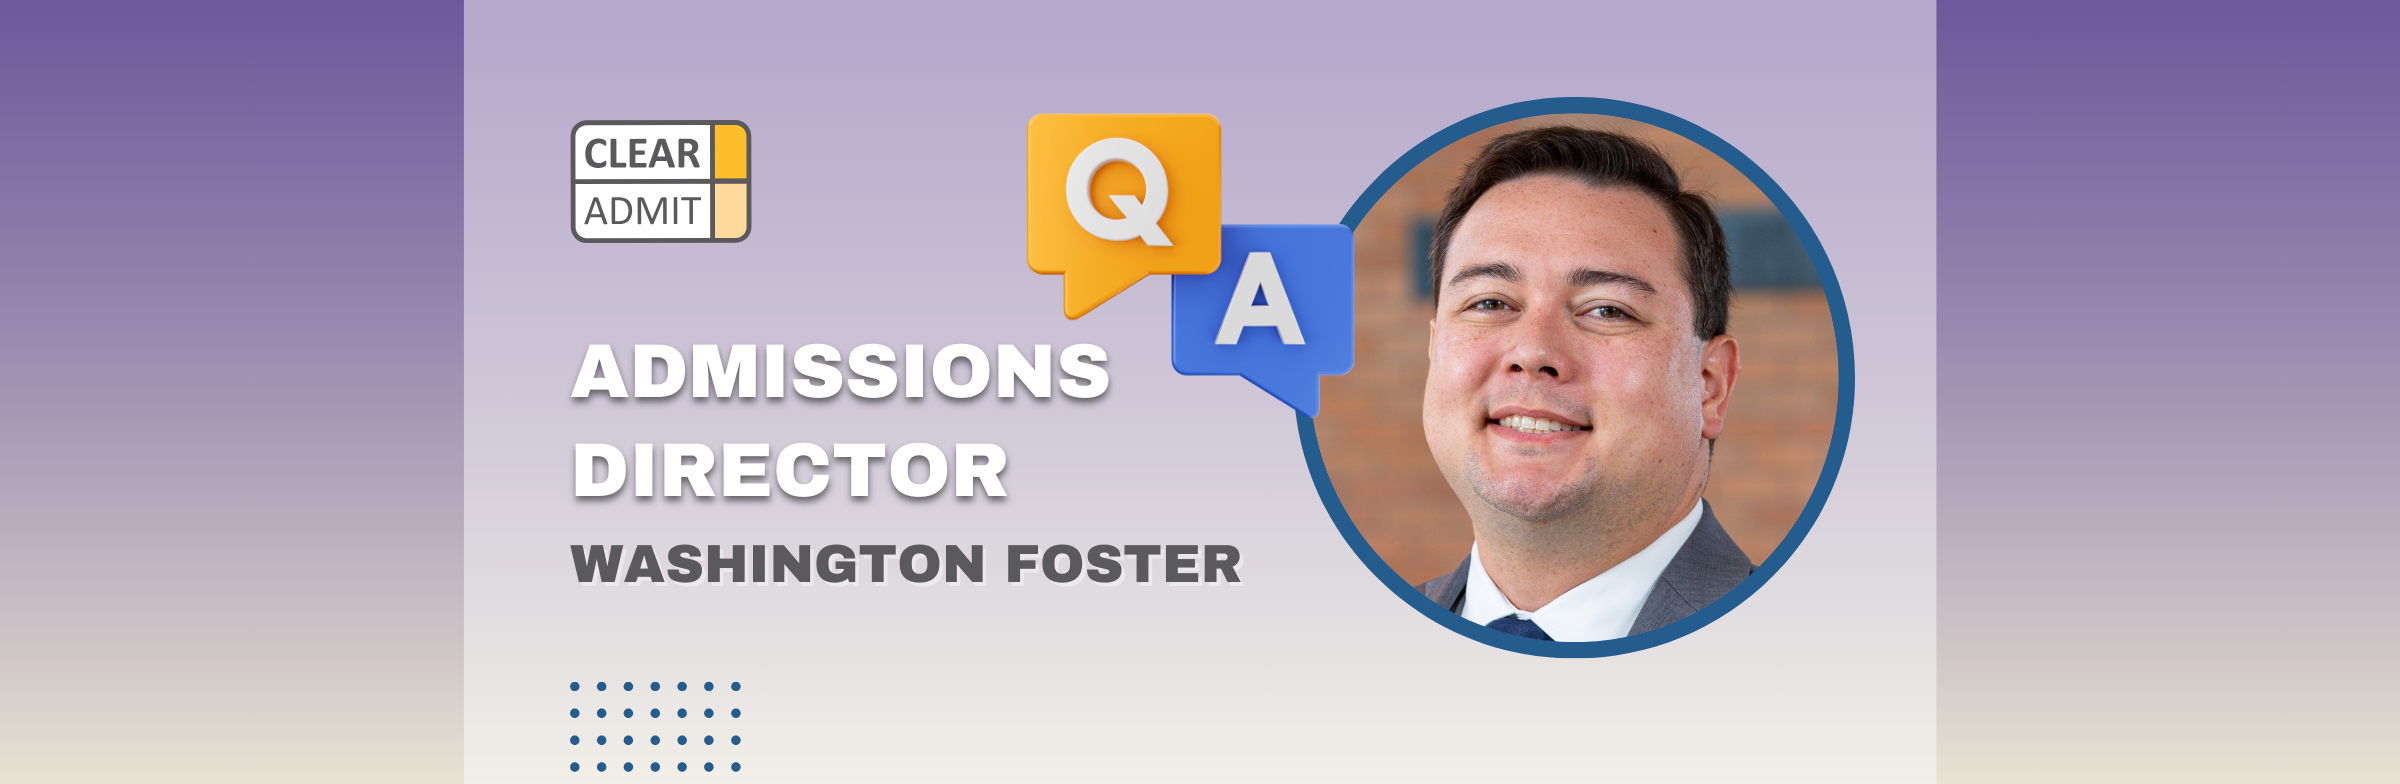 Image for Admissions Director Q&A: Brent Nagamine of University of Washington Foster School of Business